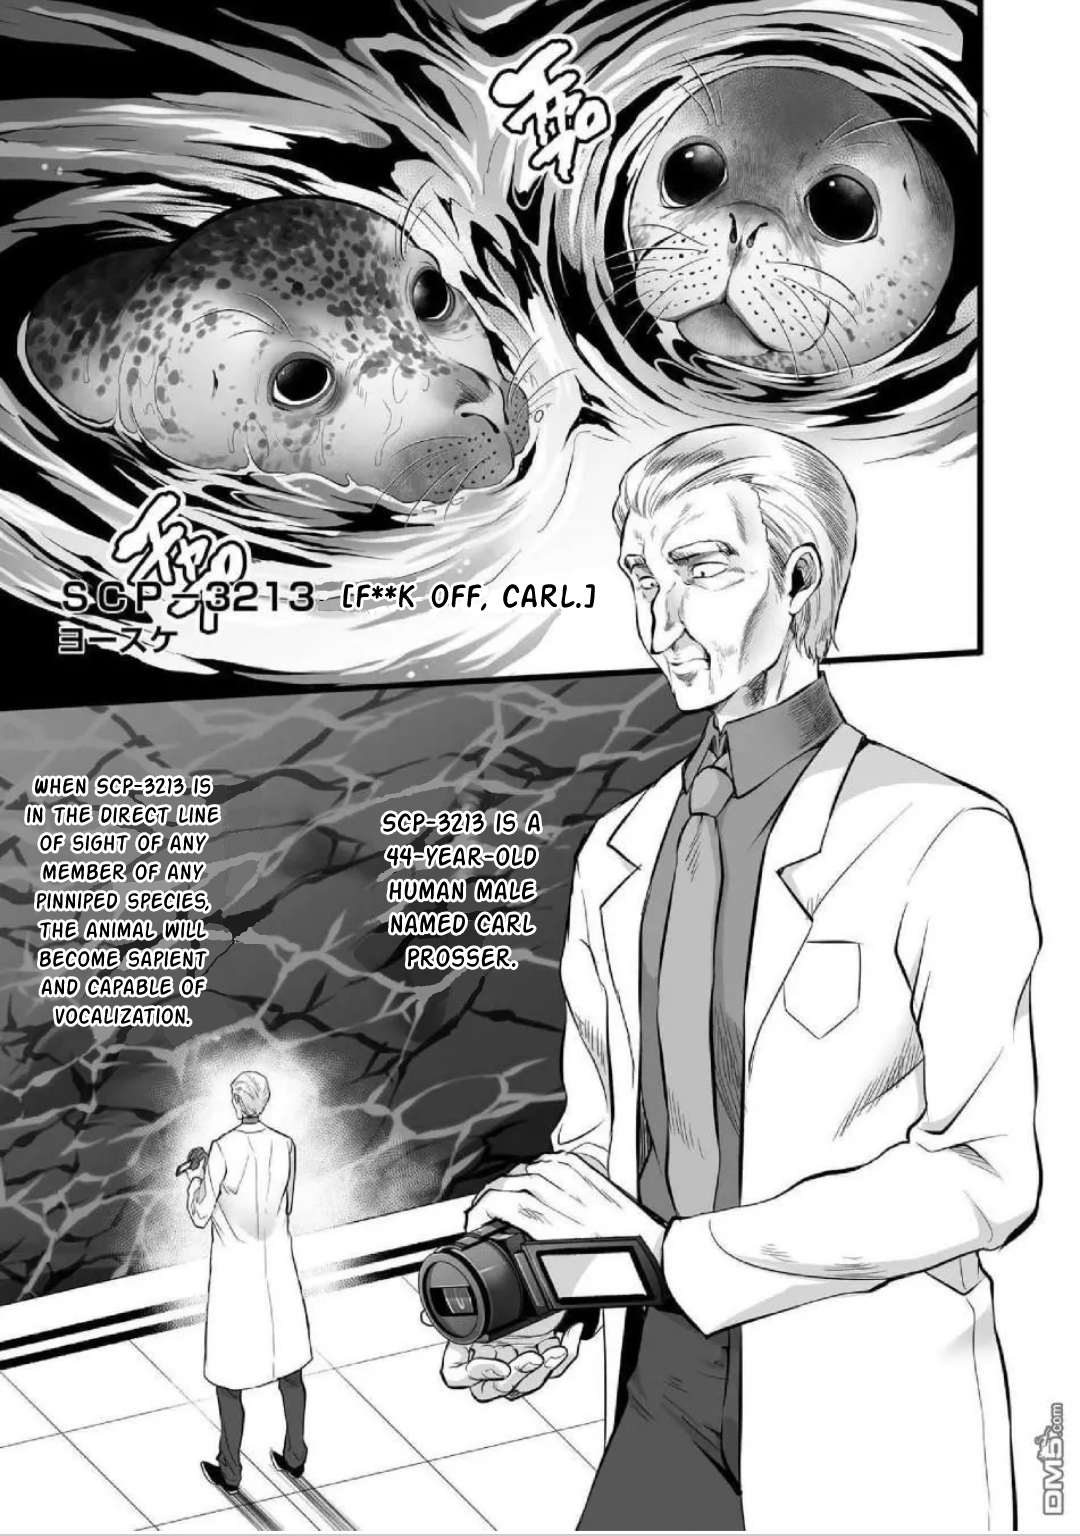 Scp Comic Anthology - Kai Chapter 8: Scp-3213 - F**k, Off Carl (Yousuke) - Picture 1